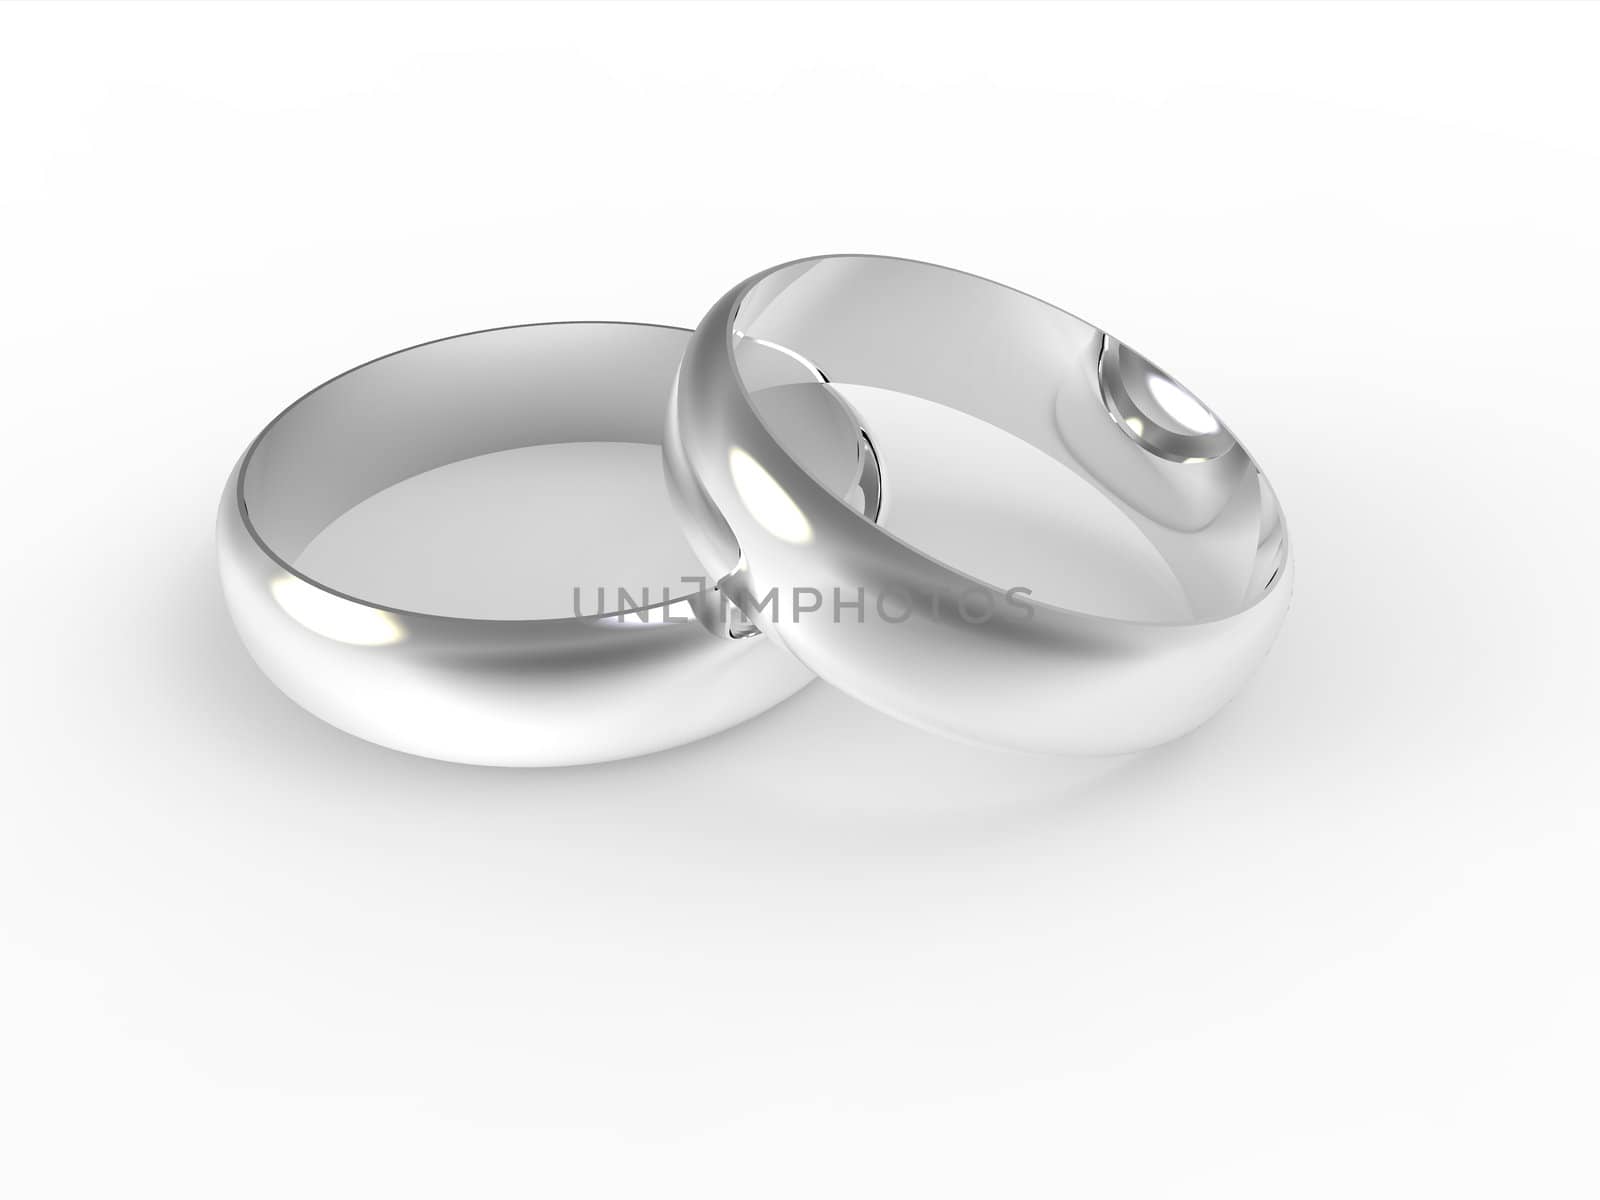 Silver wedding rings isolated on white background by vermicule